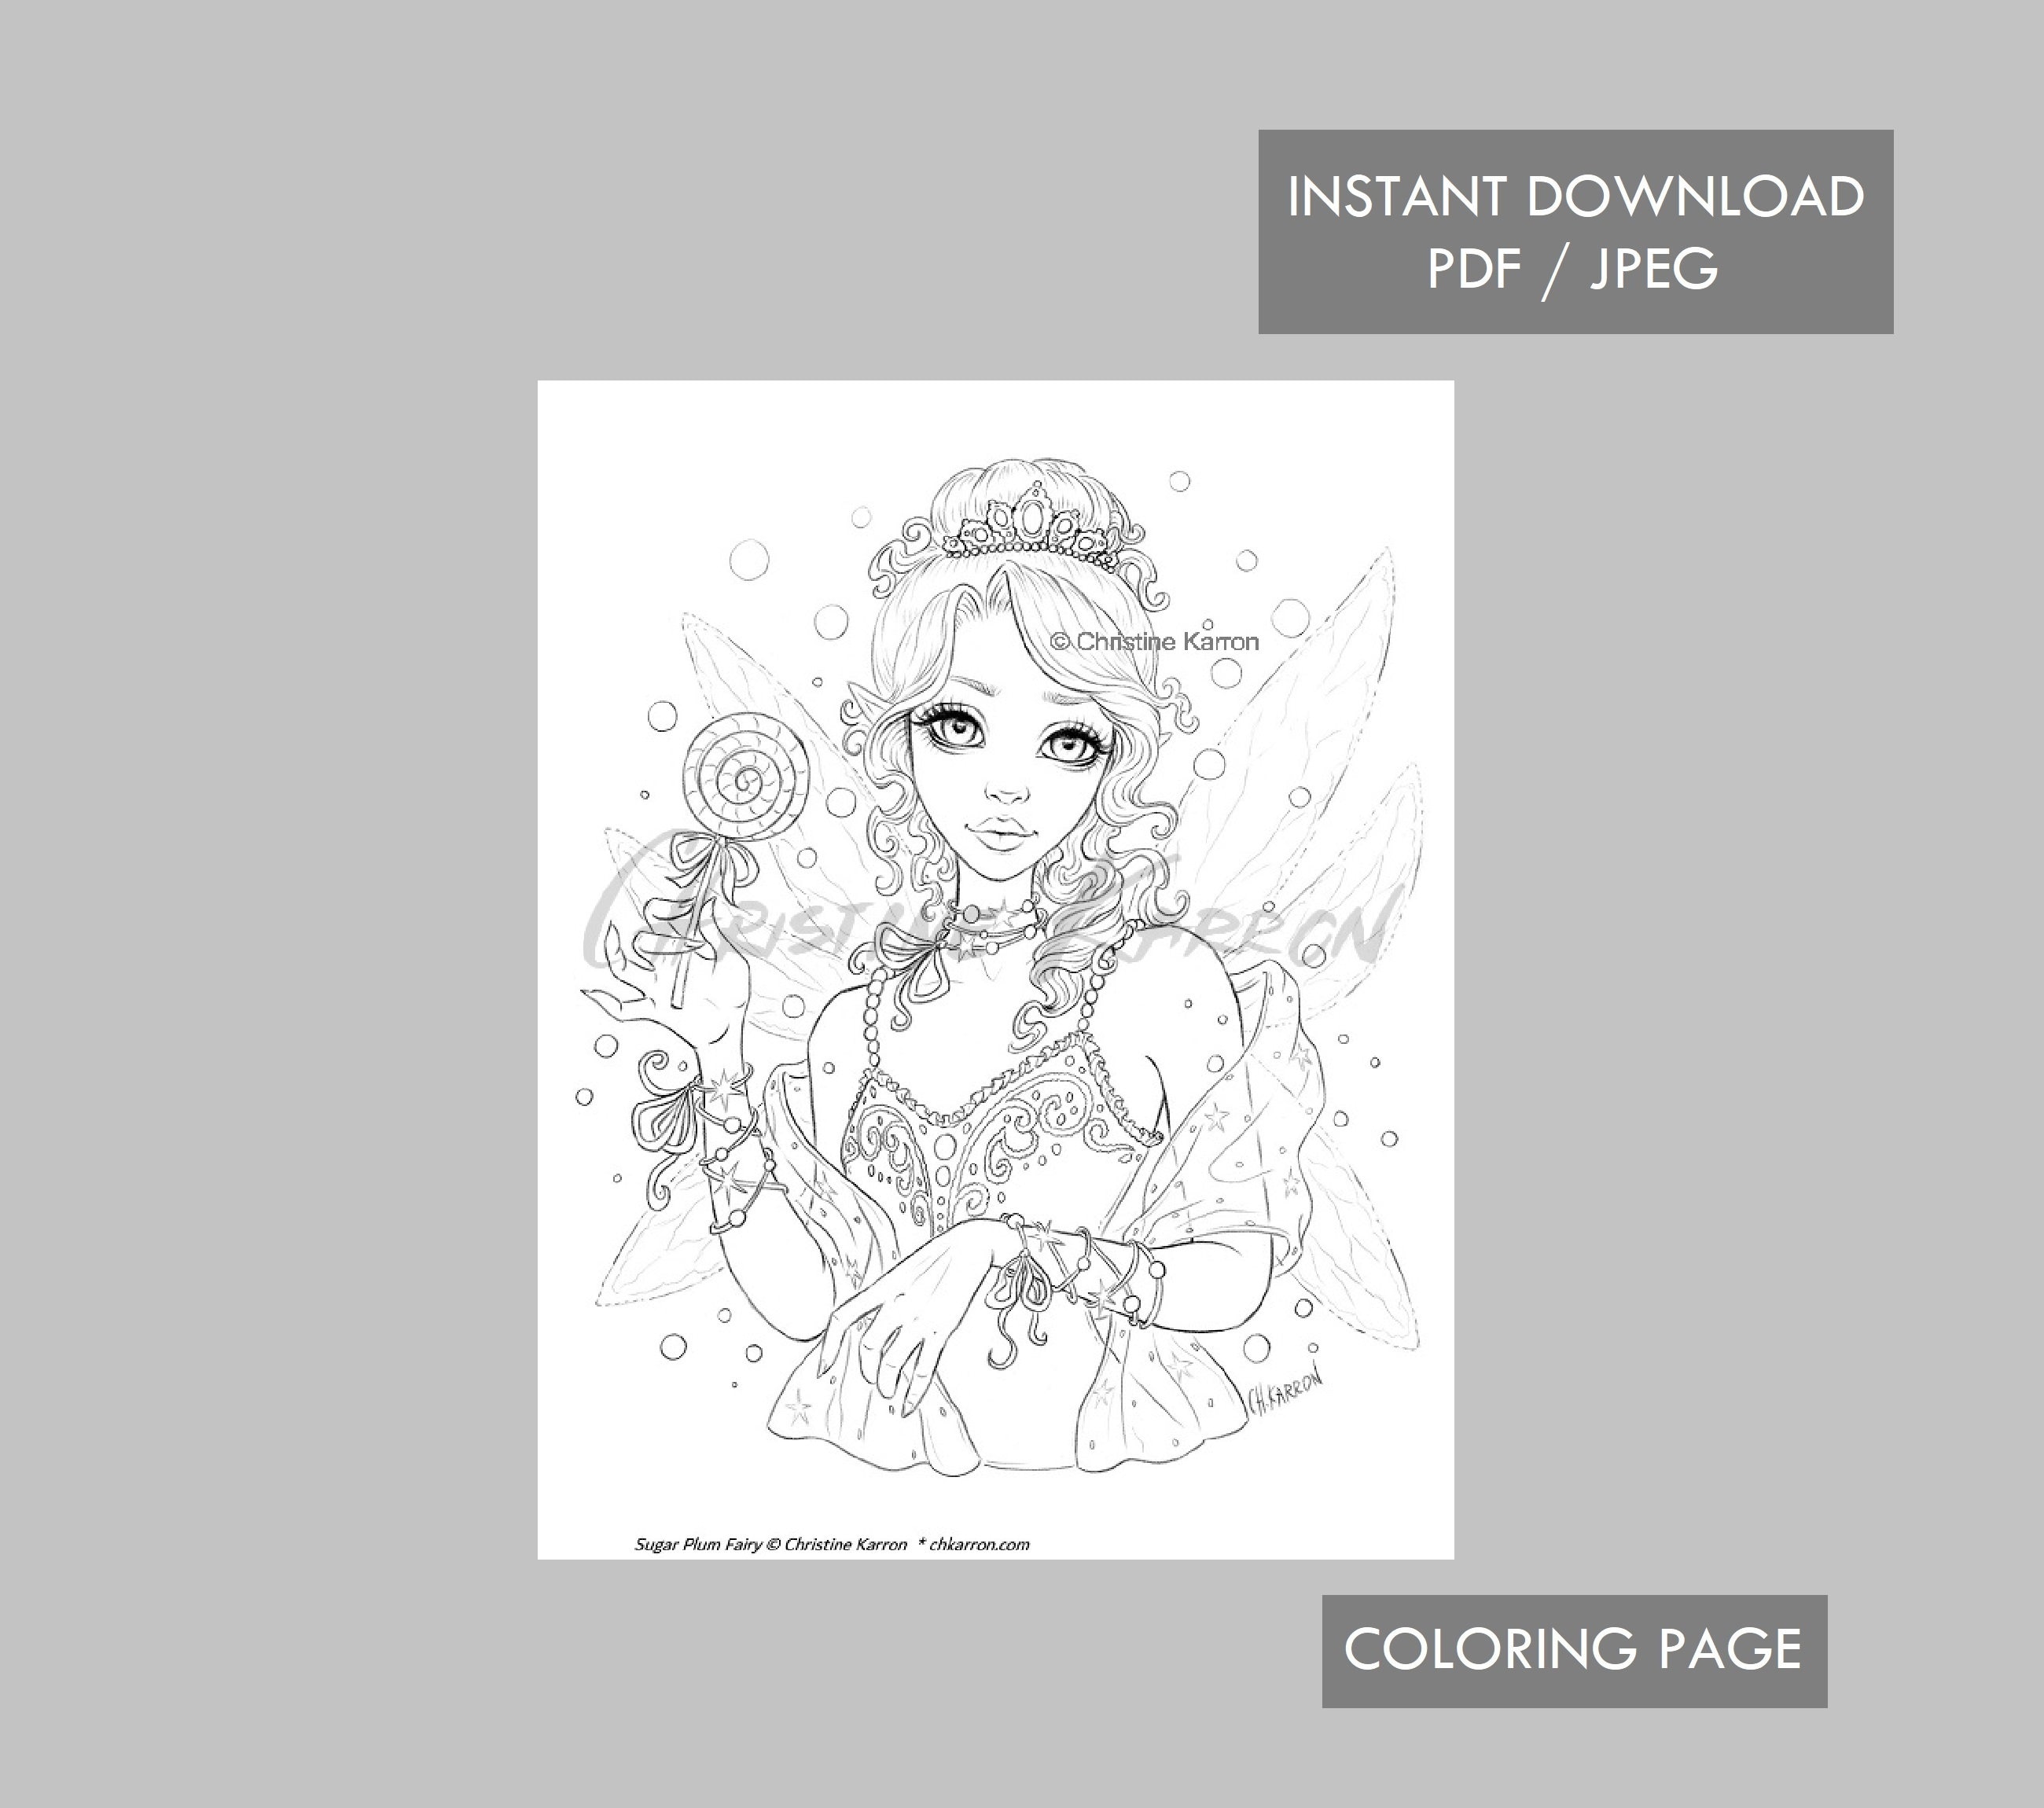 Sugar plum fairy coloring page line art illustration instant download printable file jpeg and pdf